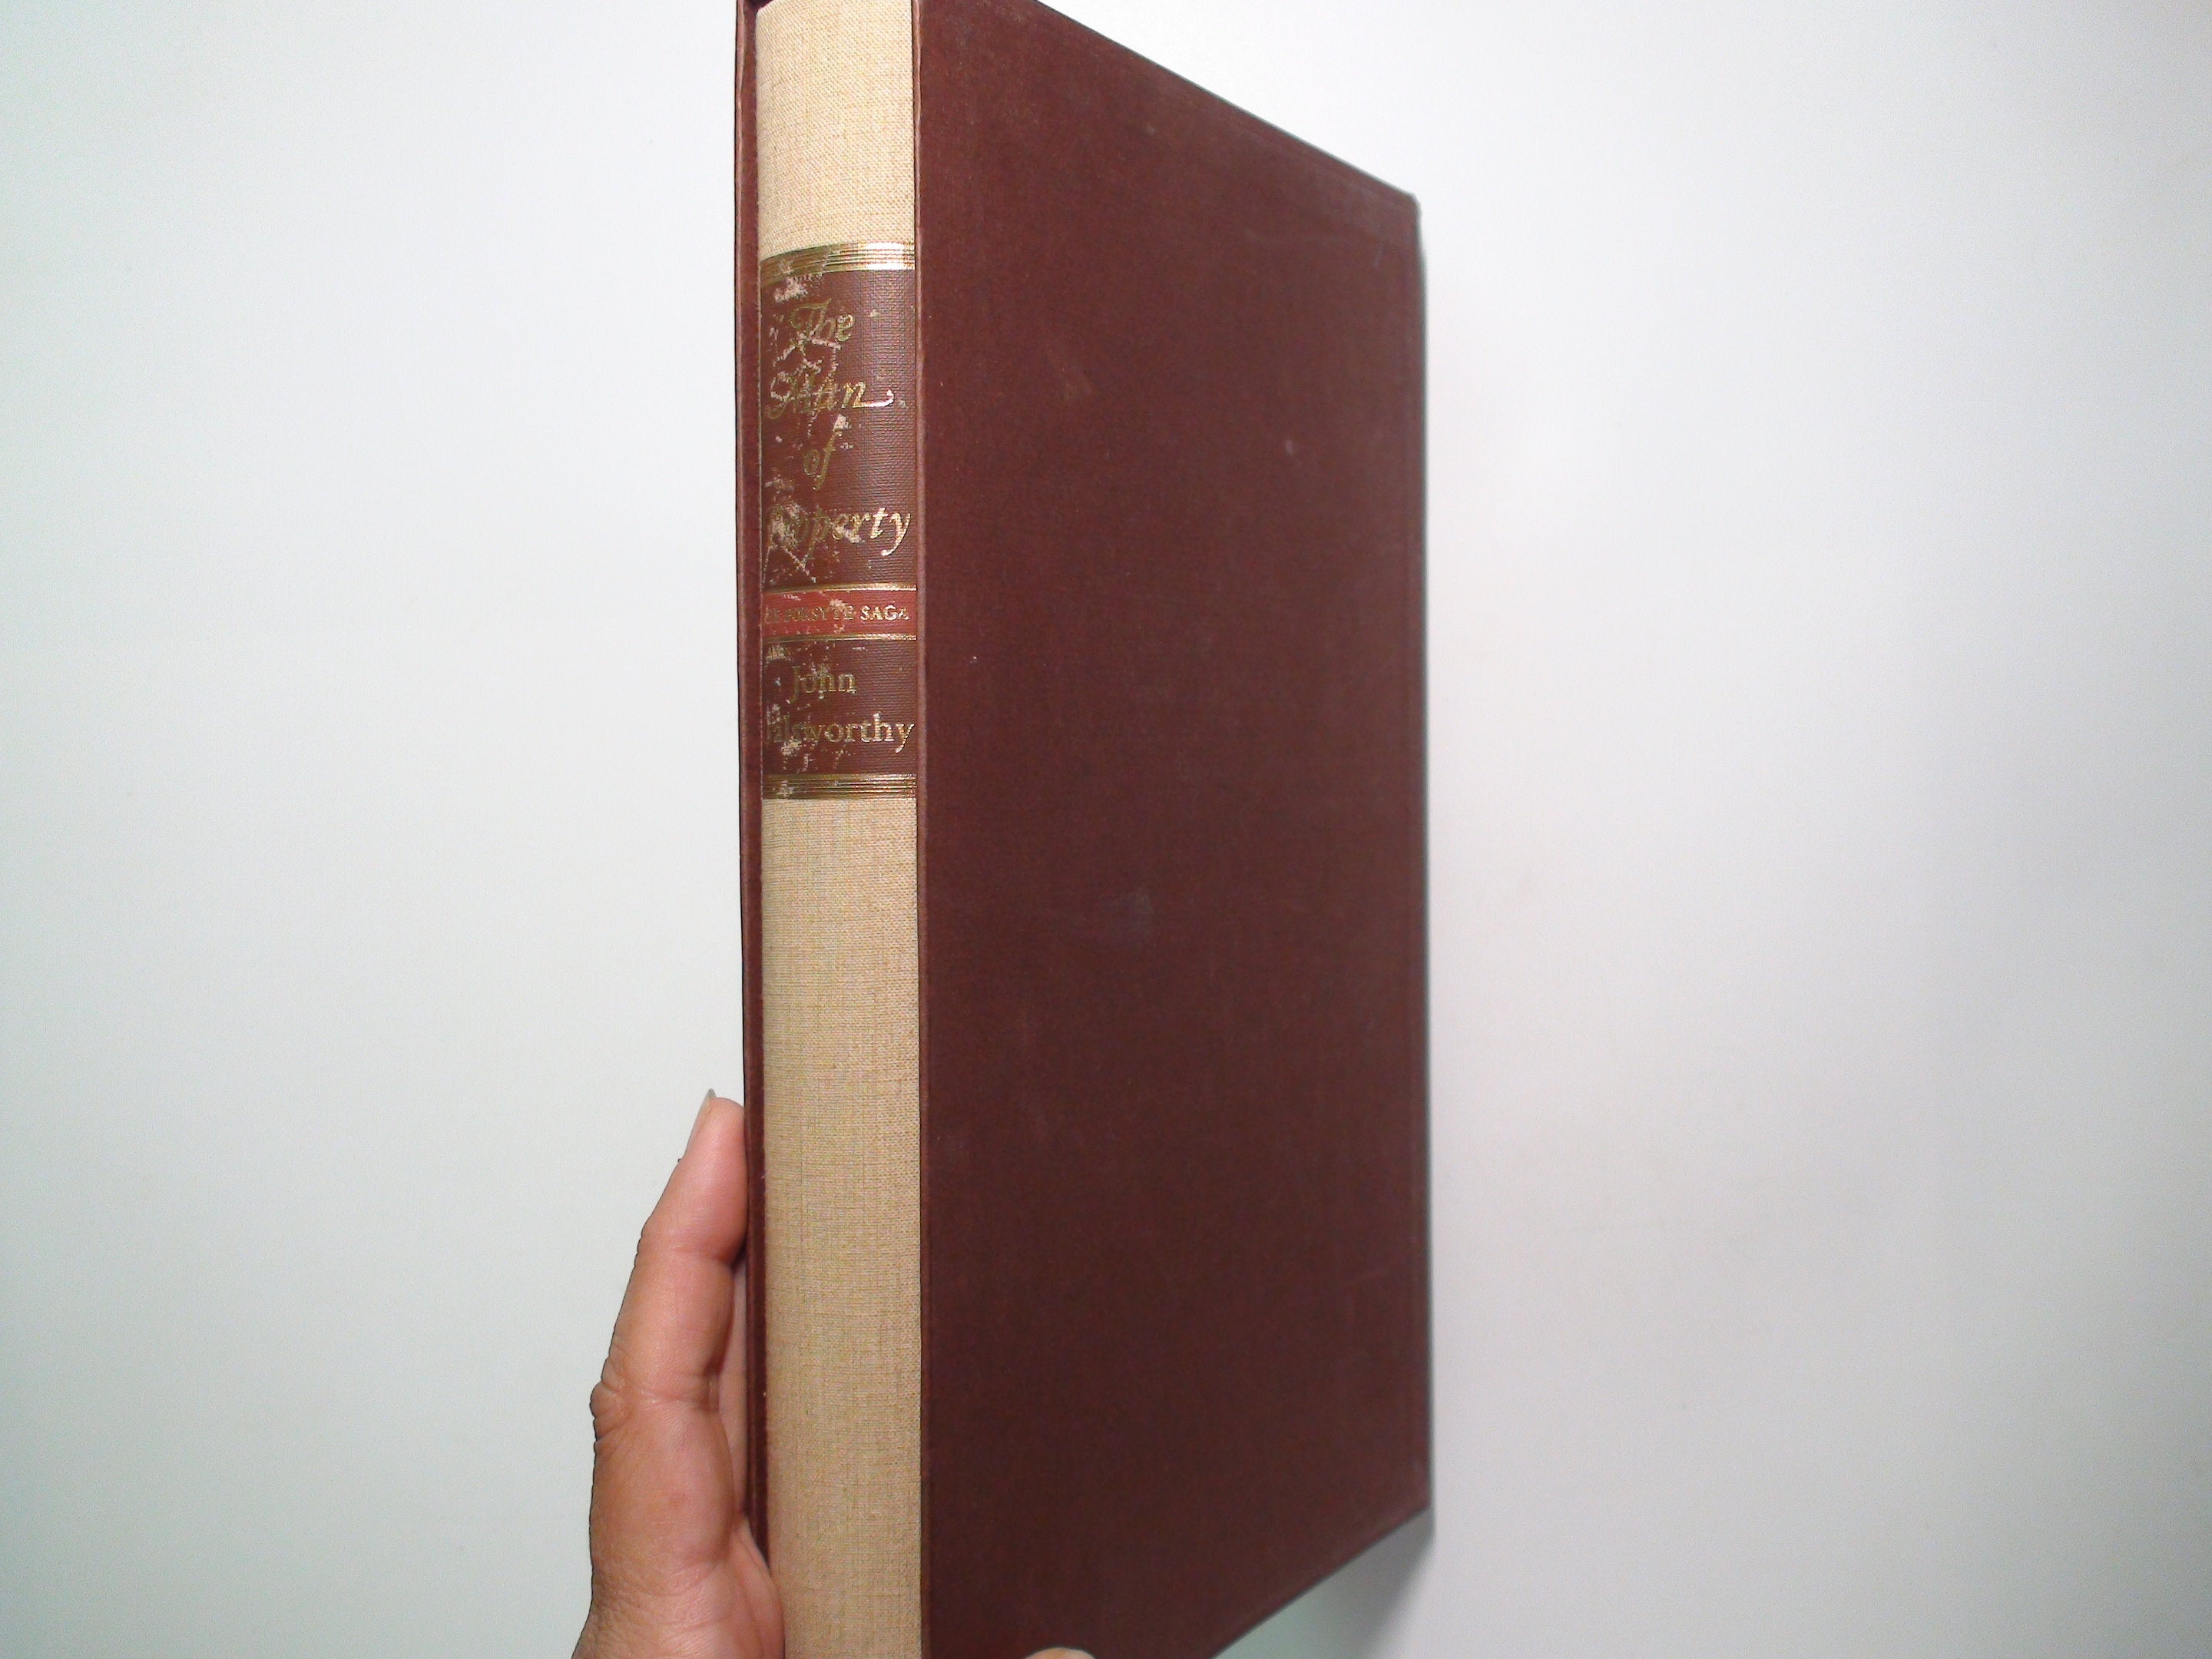 The Man of Property, by John Galsworthy, Illustrated, 1st Ed, 1964